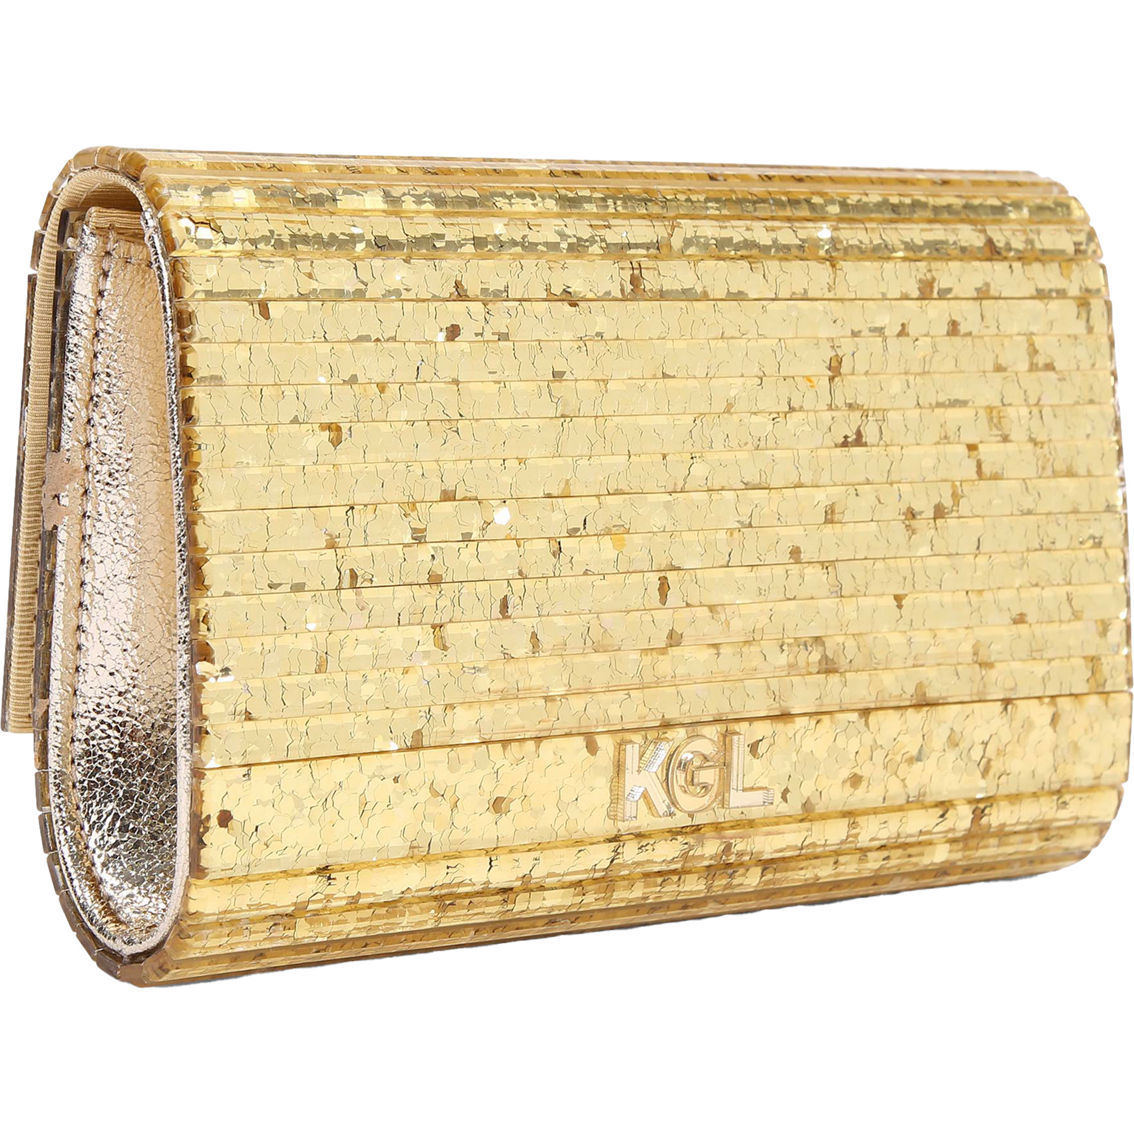 Kurt Geiger Party Eagle Clutch Drench Gold - Image 2 of 6